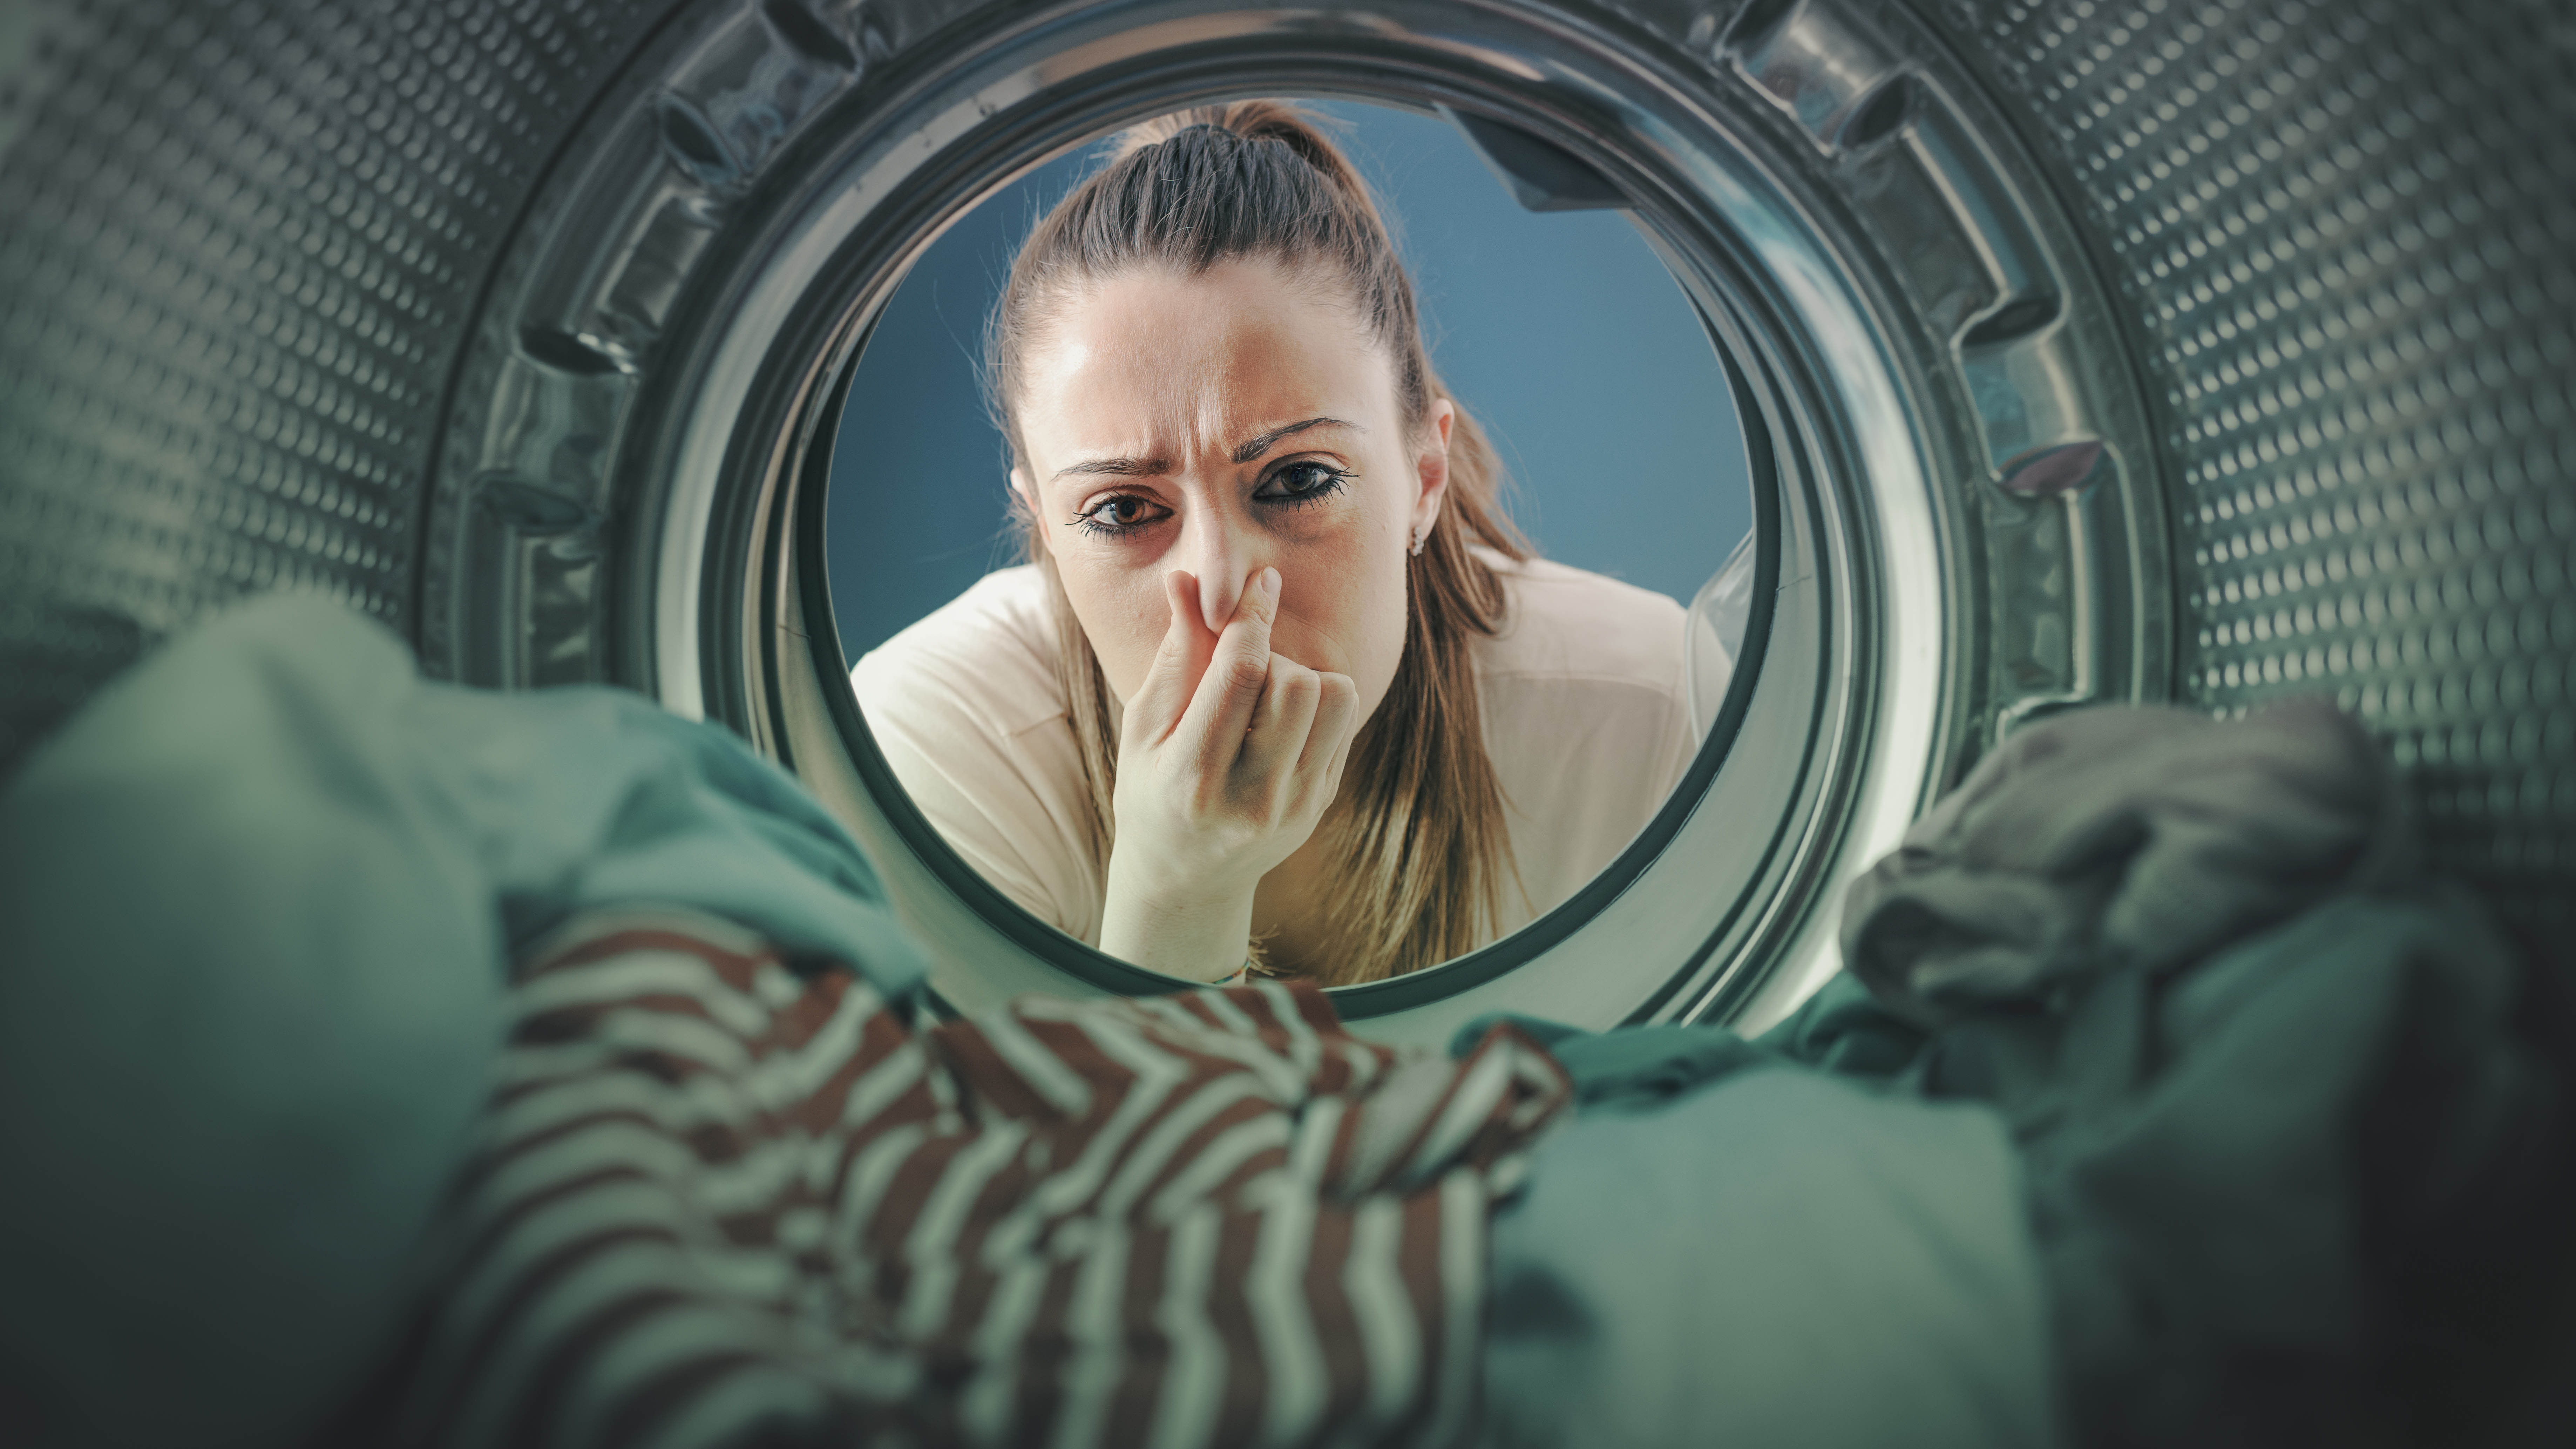 A woman holding her nose as she looks at laundry inside the washing machine